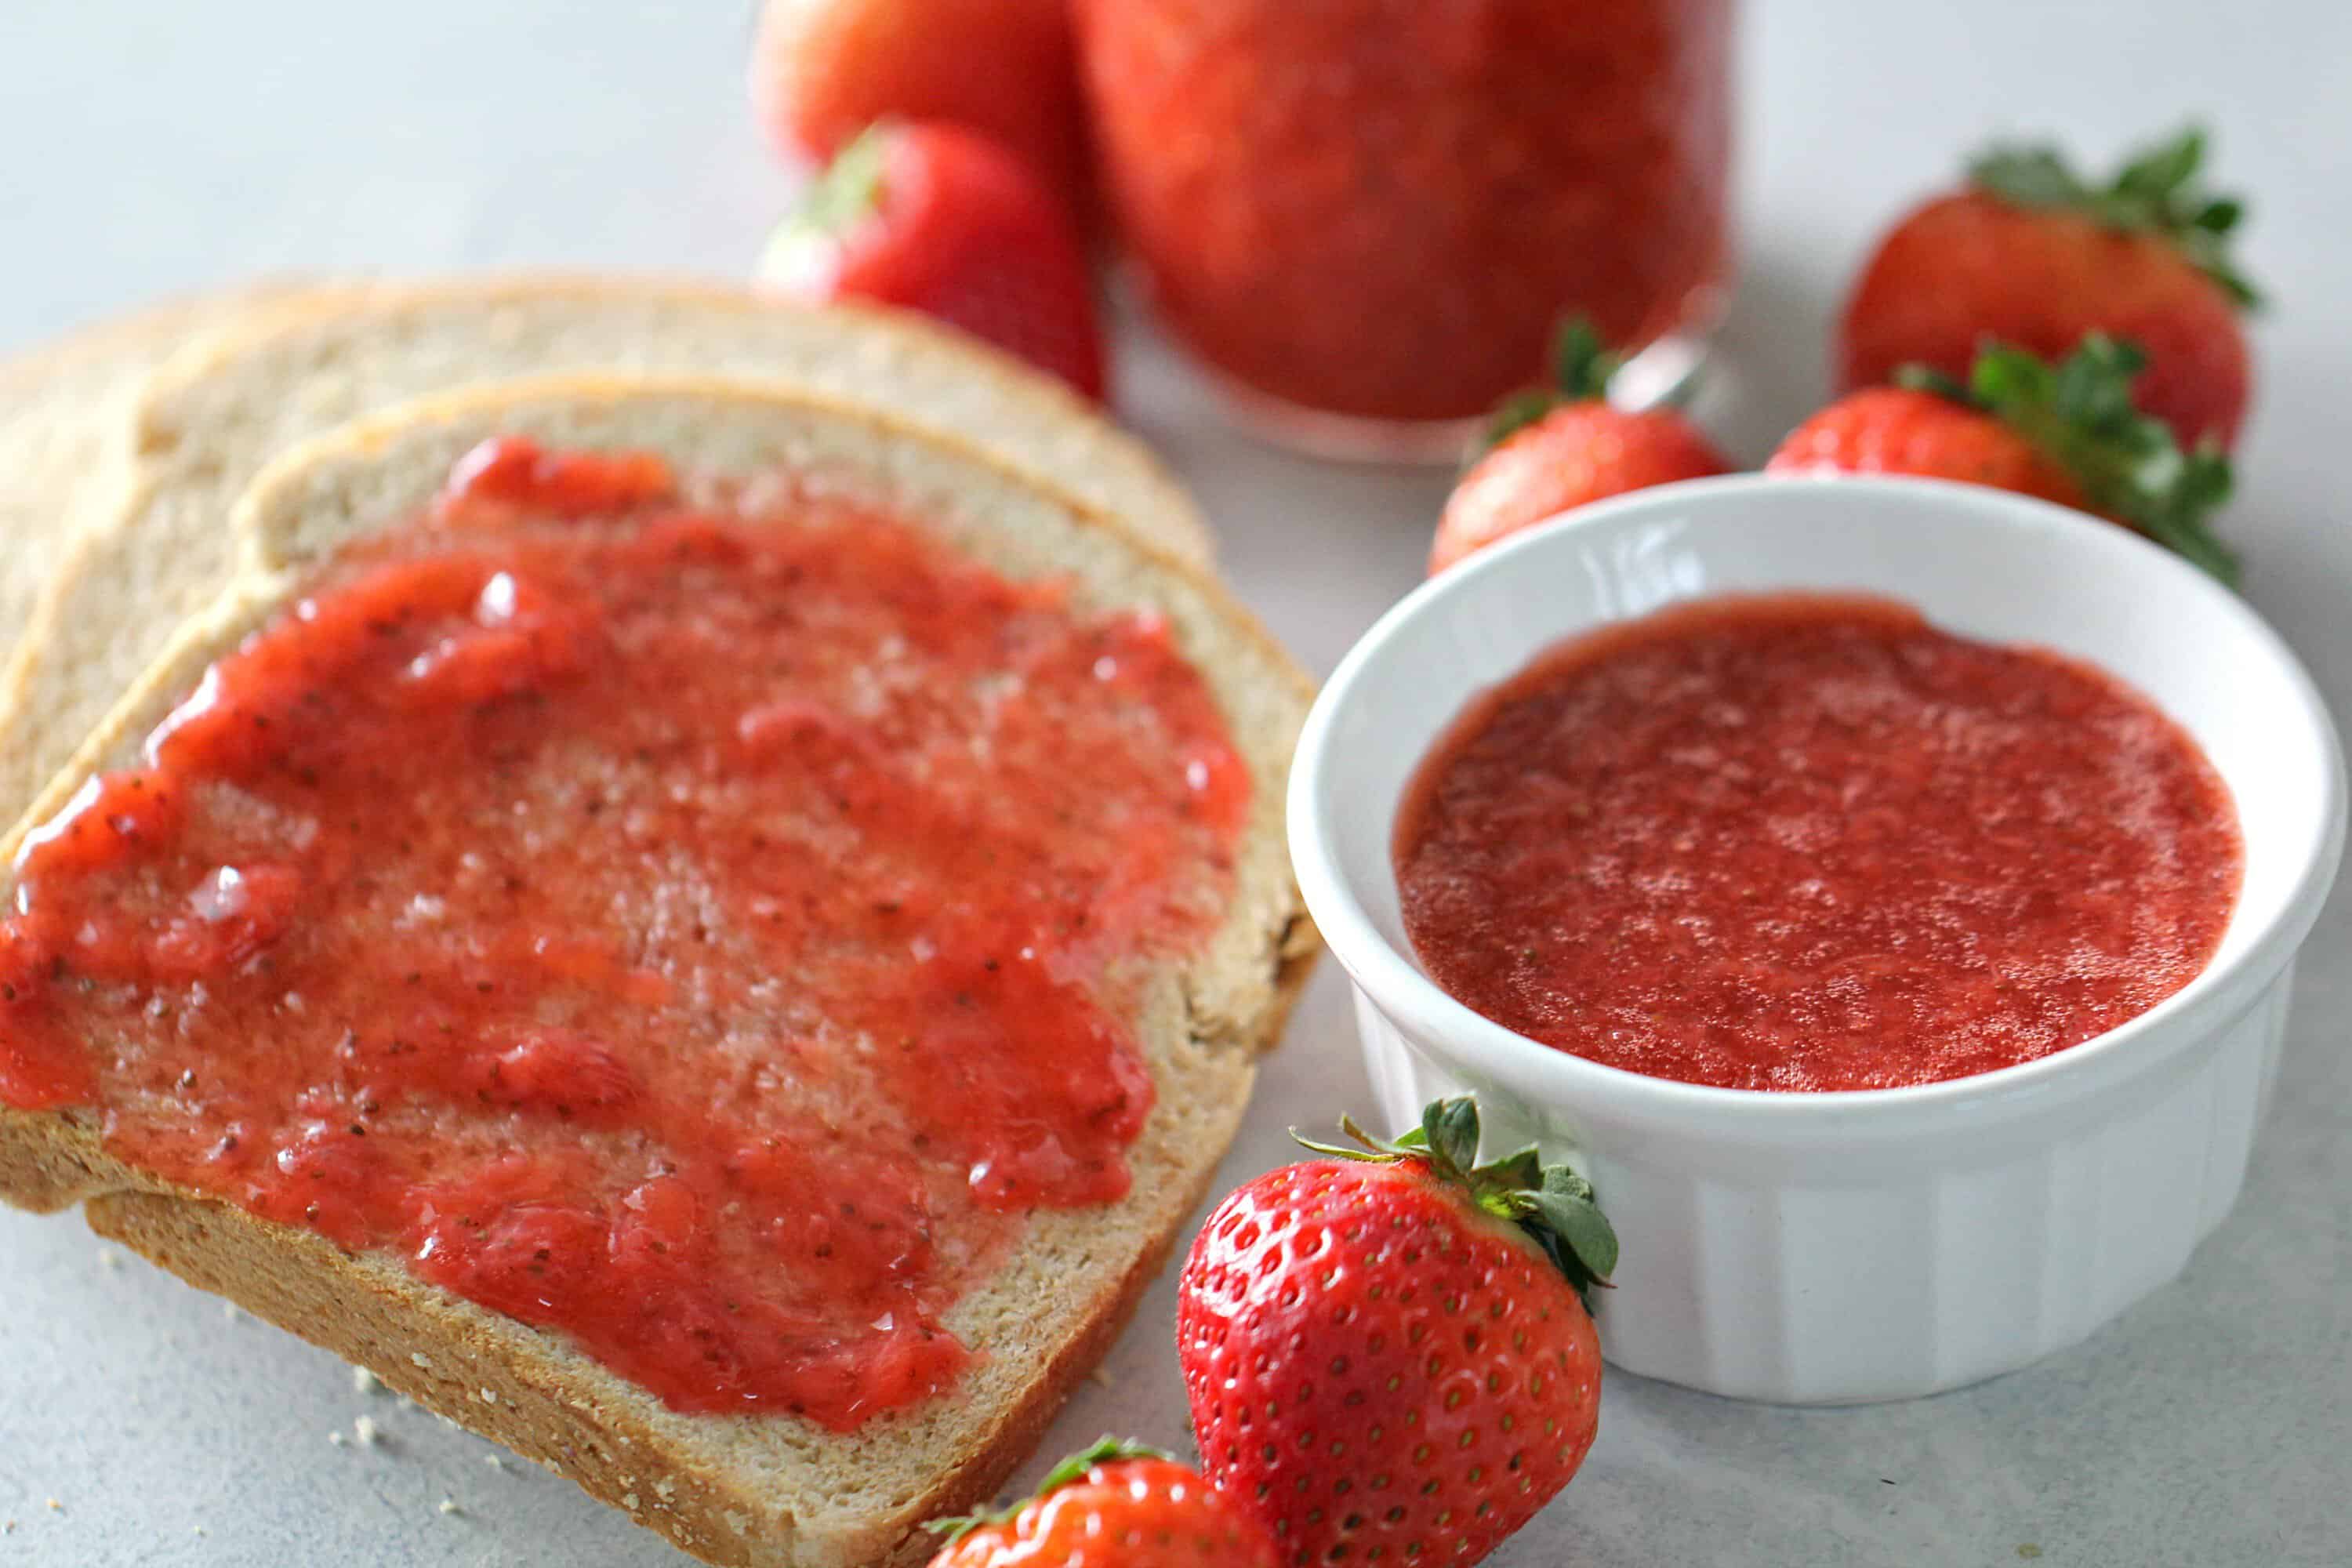 A slice of bread with Instant Pot Strawberry Jam spread on top